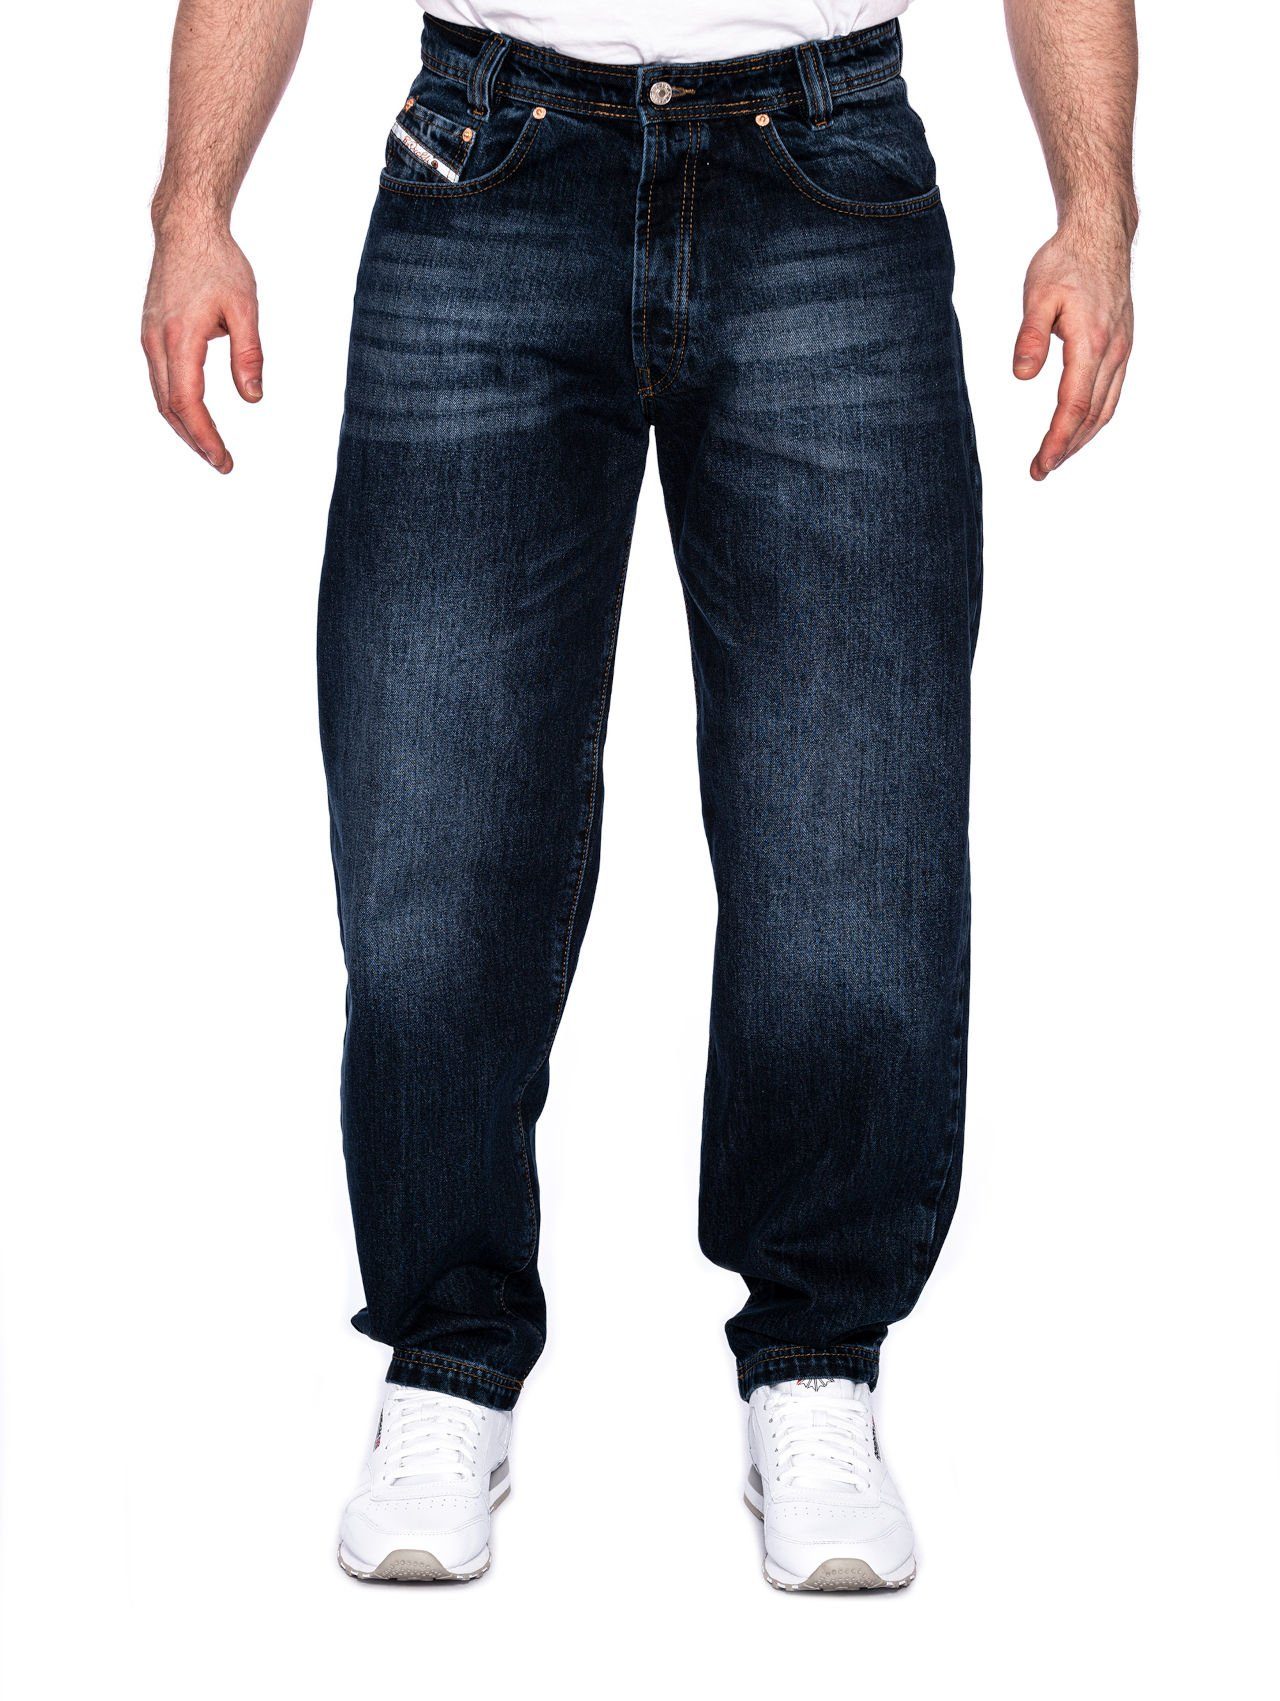 PICALDI Jeans Weite Jeans Zicco 471 Loose Fit, Five Pocket Jeans